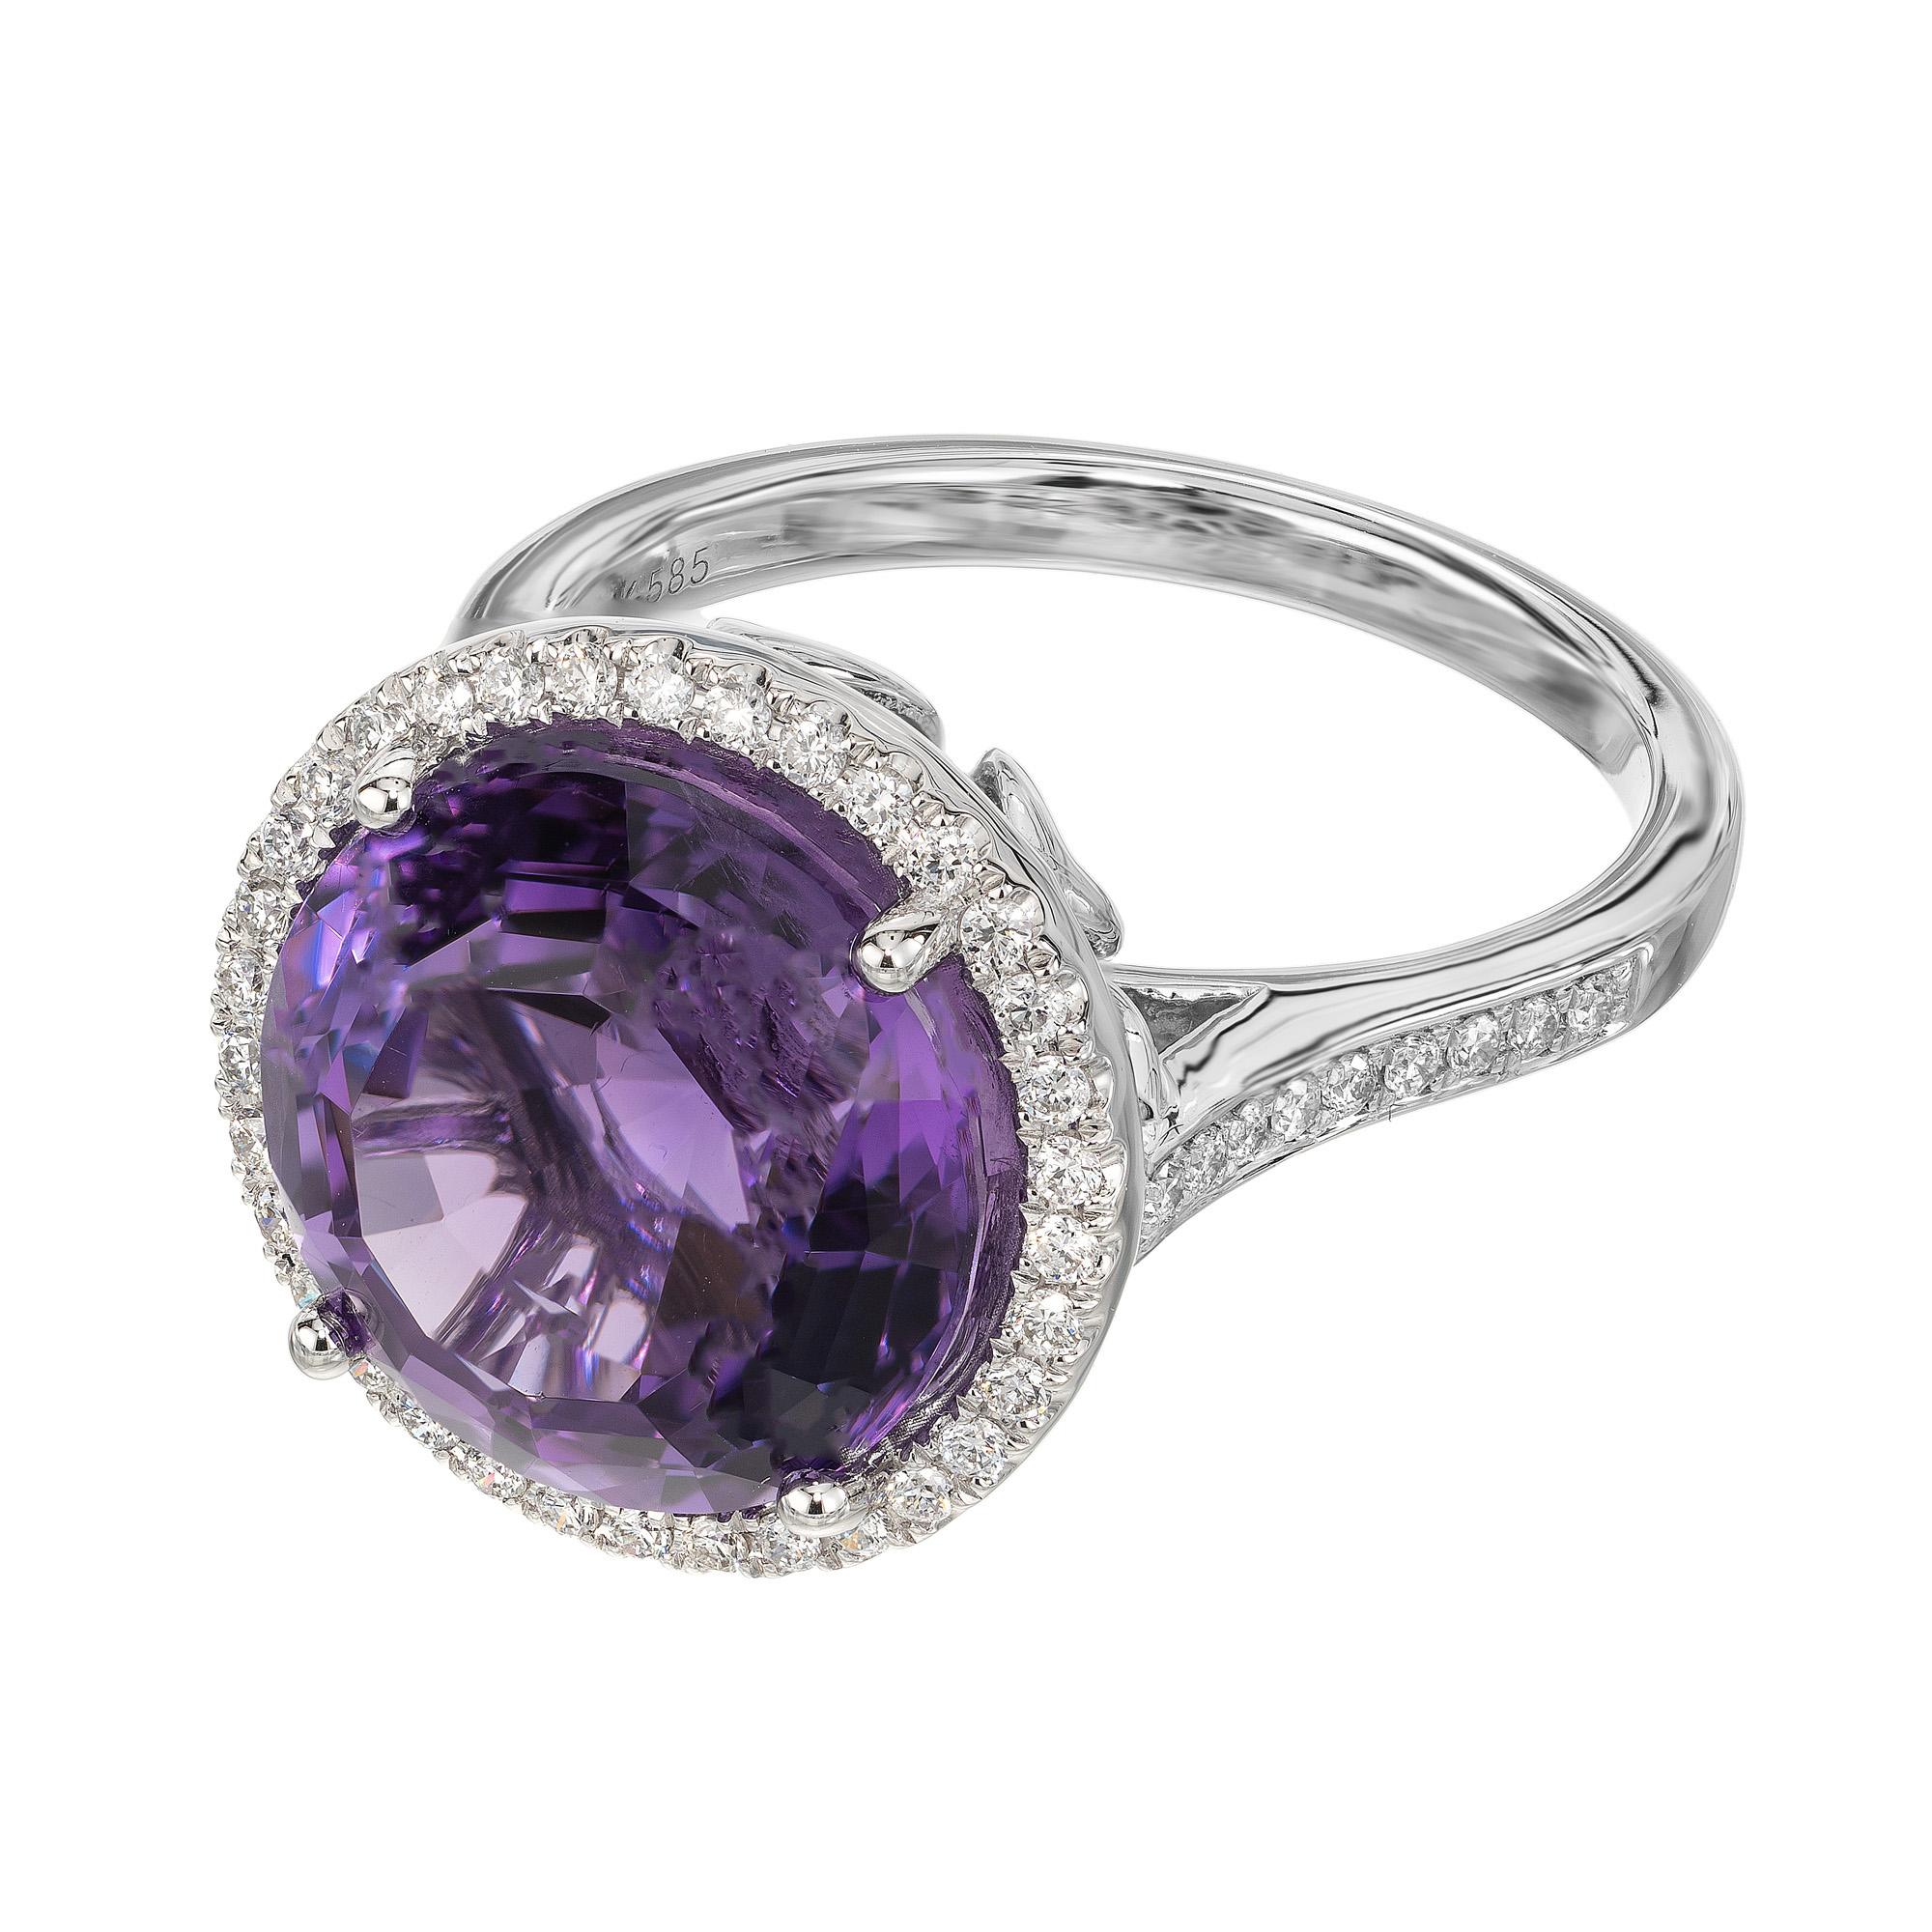 6.46 Carat Round Amethyst Diamond Halo White Gold Cocktail Ring  In Excellent Condition For Sale In Stamford, CT